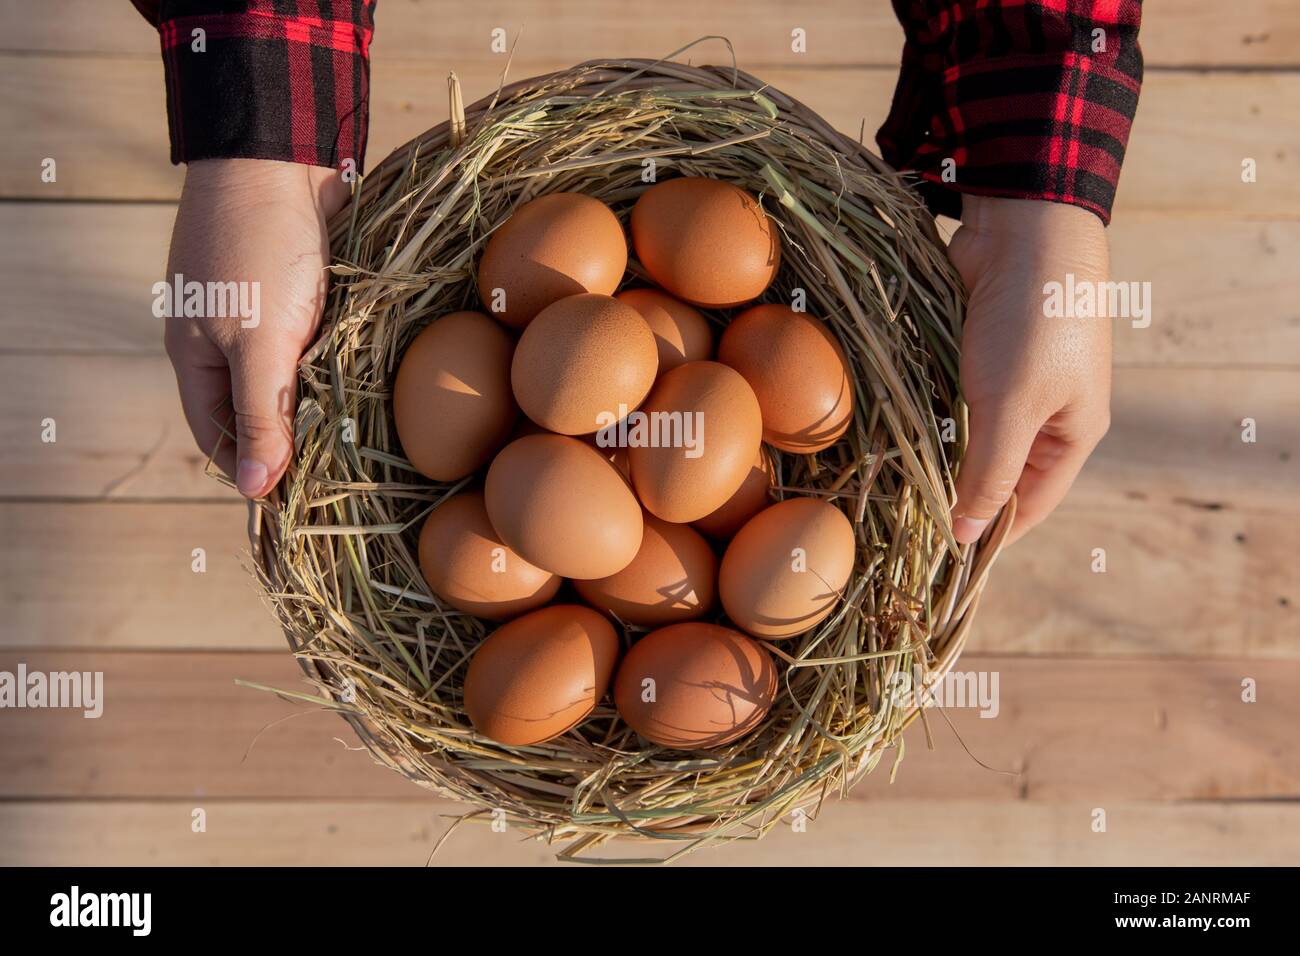 Women wear red striped shirts, put fresh eggs in a rattan baskets placed on wooden floor. Stock Photo